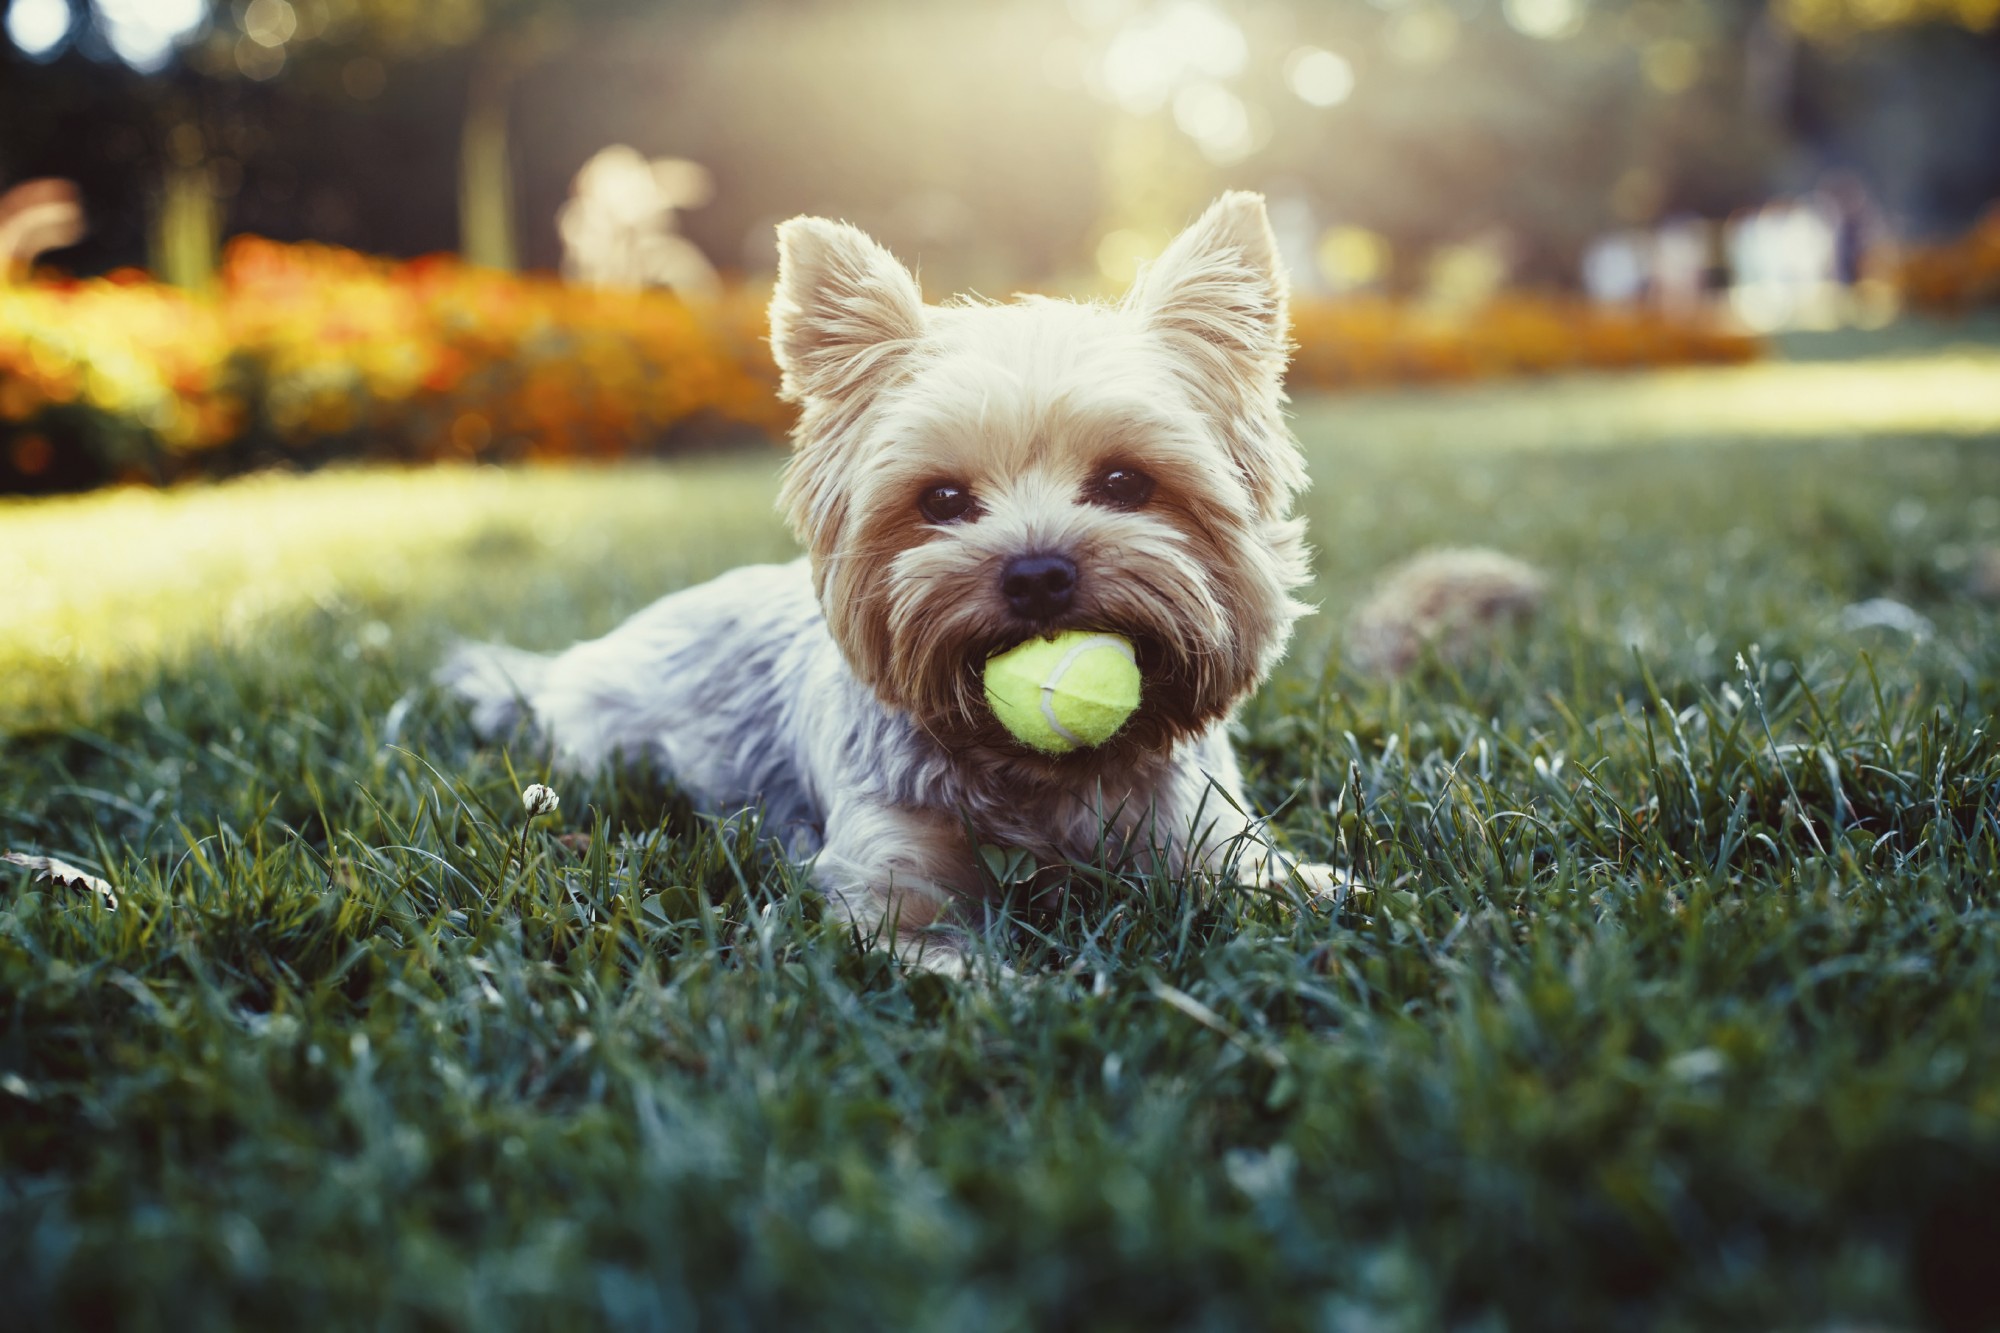 A young yorkshire terrier puppy holding a tennis ball in his mouth.